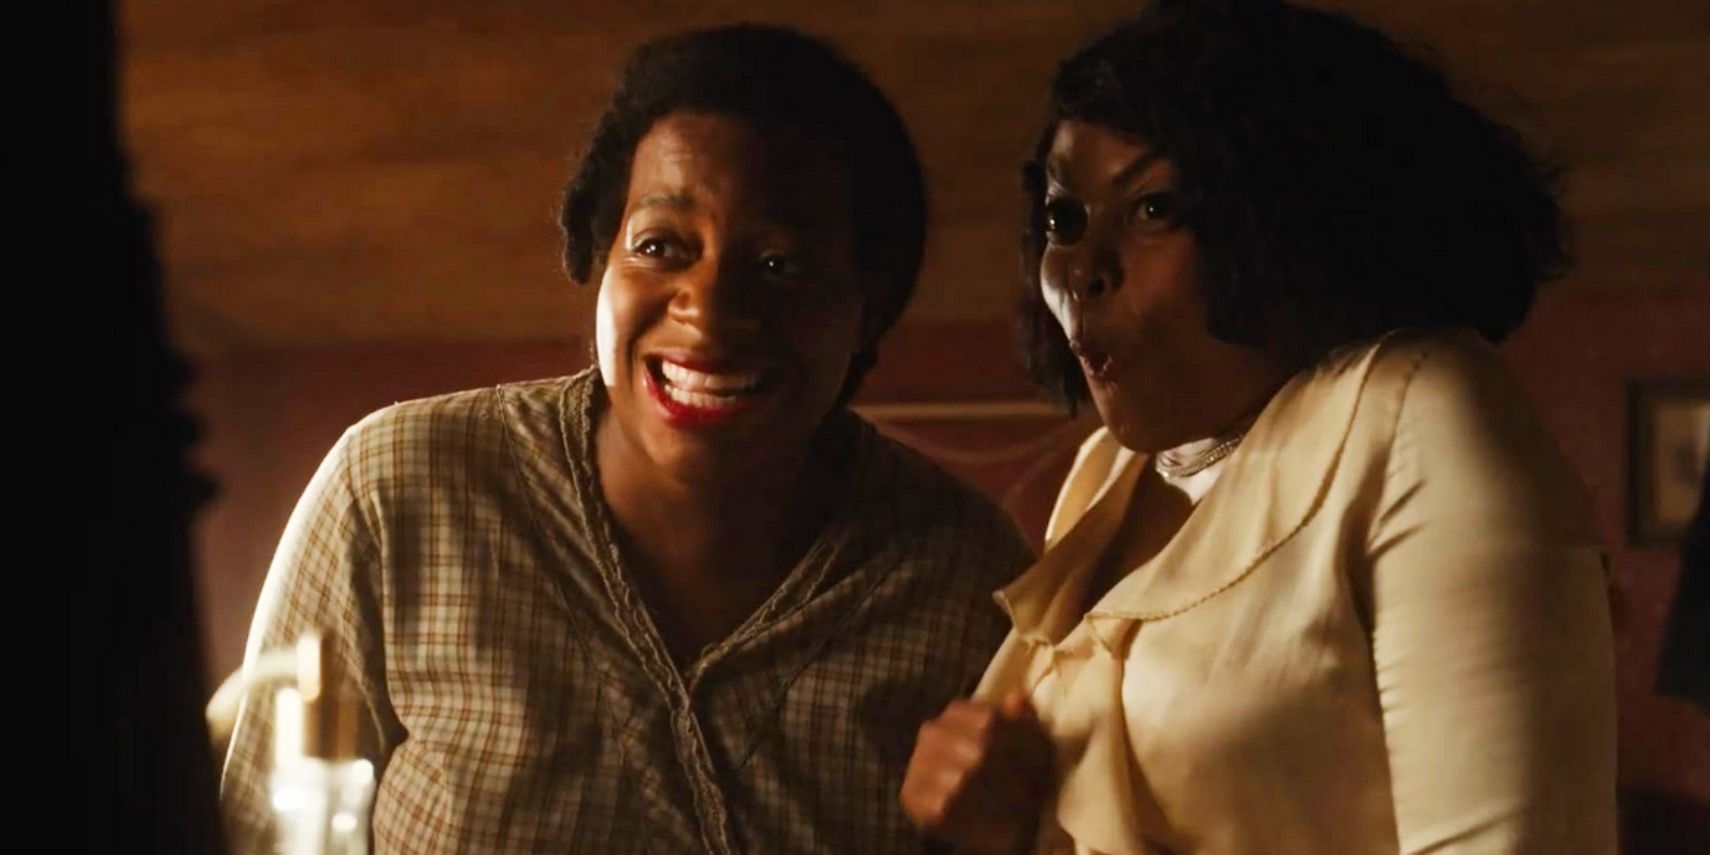 Celie (Fantasia Barrino) and Shug Avery (Taraji P. Henson) excited together in The Color Purple